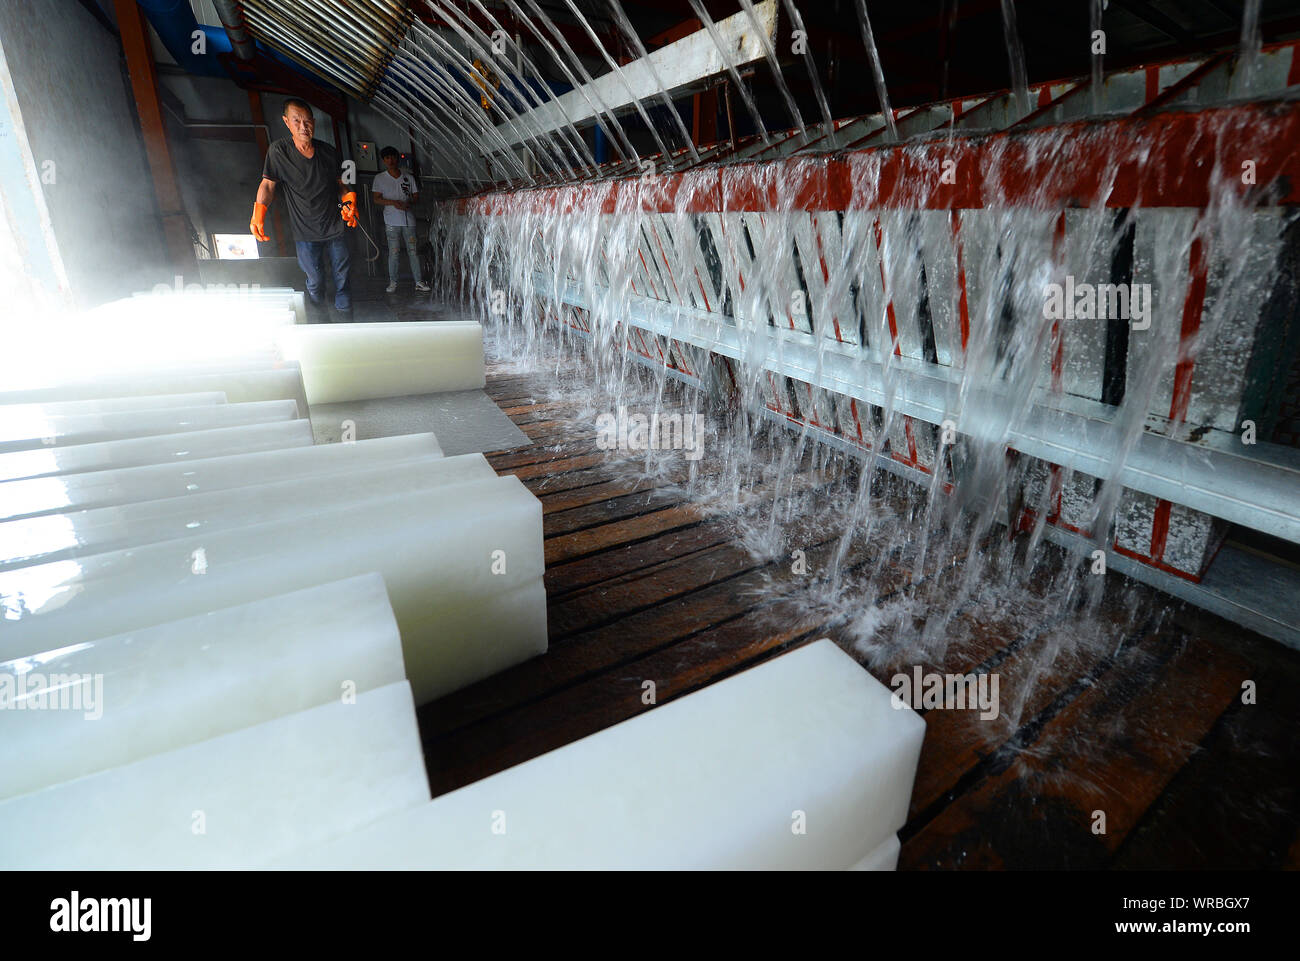 A Chinese worker moves newly-manufactured ice blocks as water is poured into freezers at an ice factory on a scorcher in Liuhe Town, Taicang City, eas Stock Photo